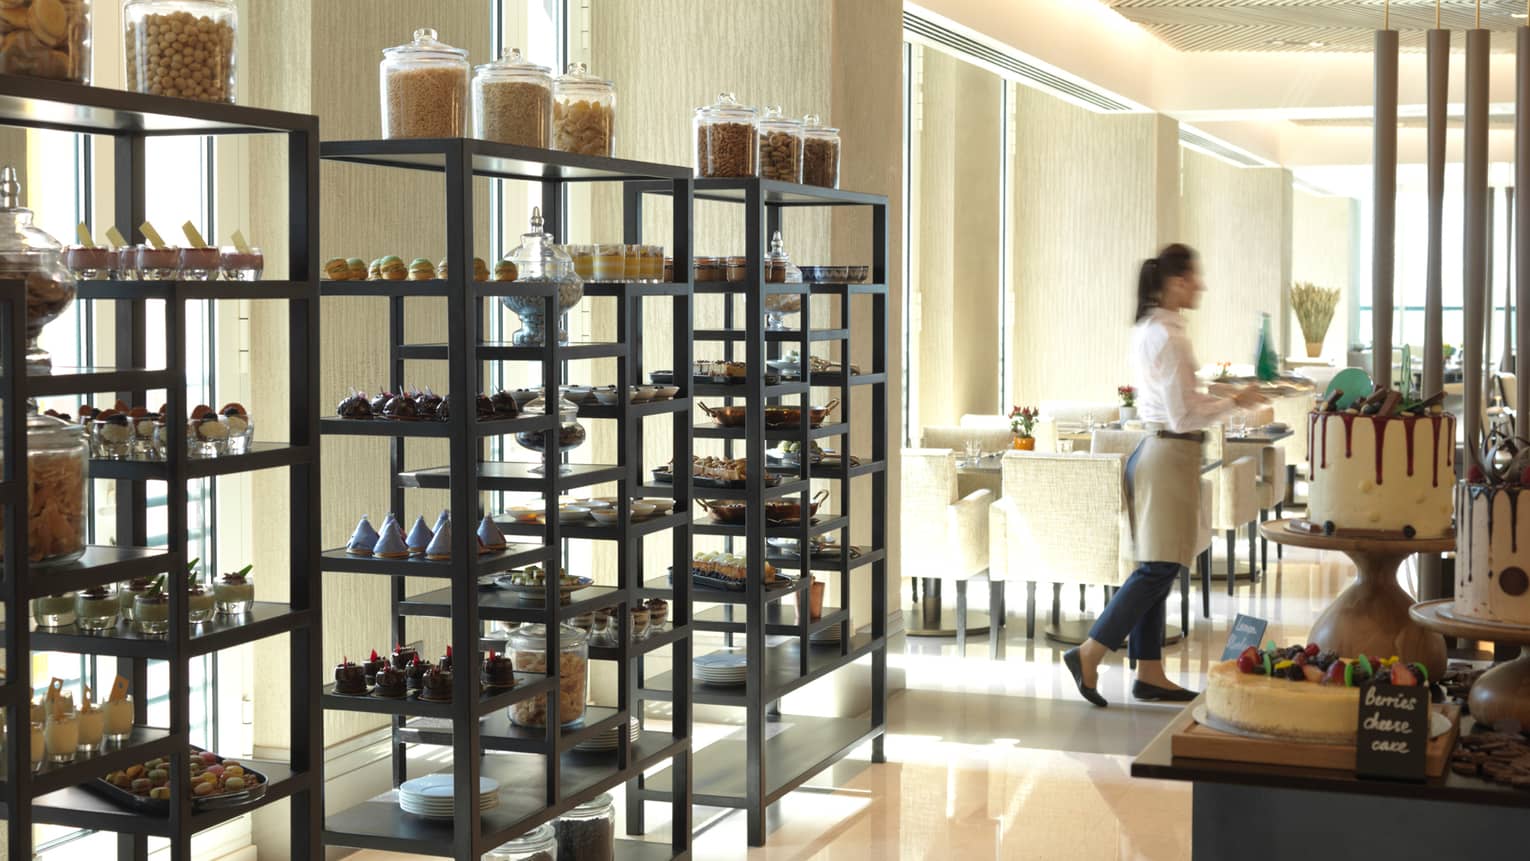 Three tall racks filled with fancy pastries and desserts in front of window, server carries tray to dining room